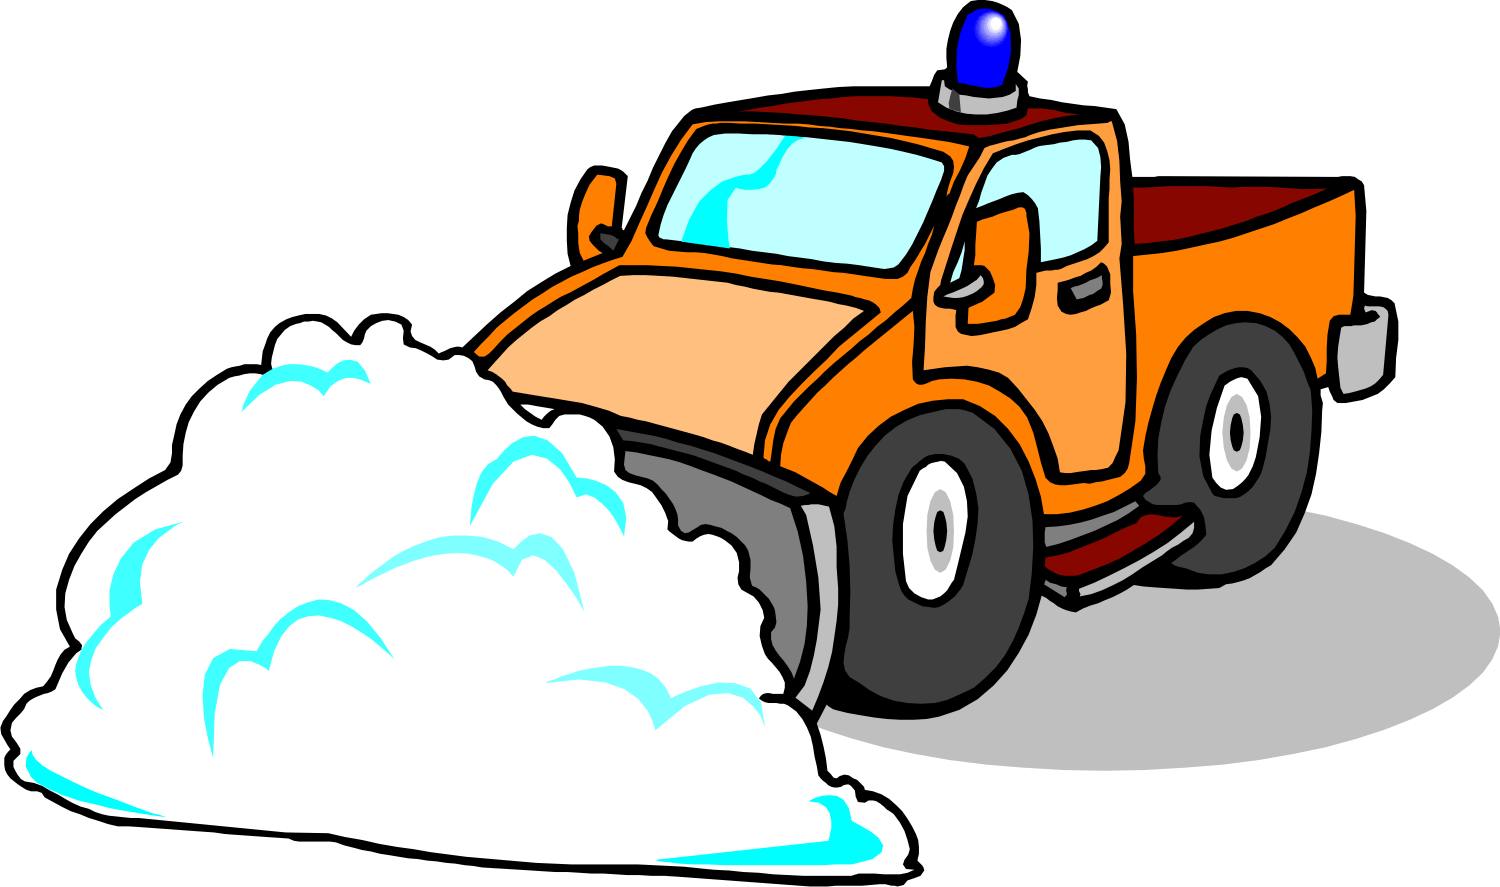 Clip Arts Related To : snow plowing snow plow clipart. view all Plowing T.....